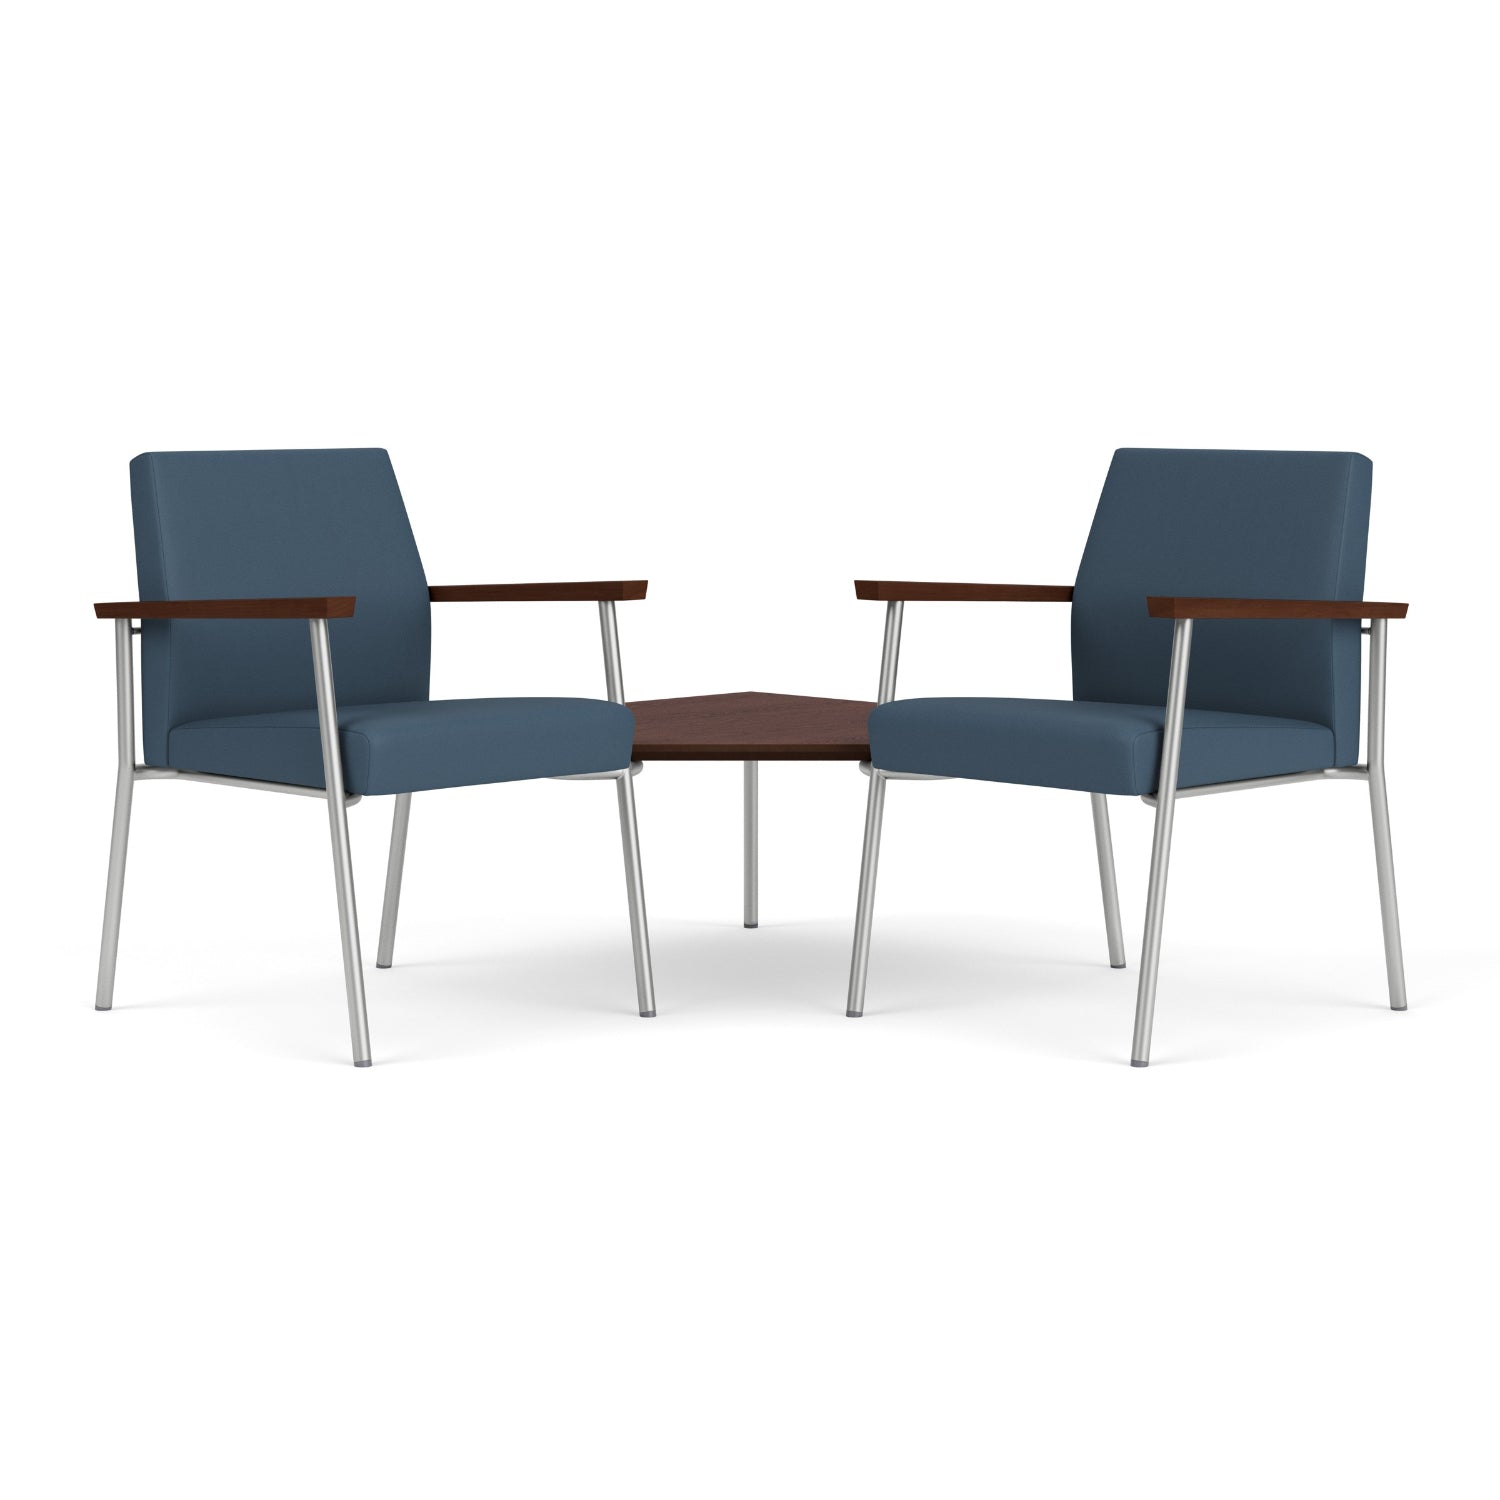 Mystic Guest Collection Reception Seating, 2 Chairs with Connecting Corner Table, Standard Vinyl Upholstery, FREE SHIPPING